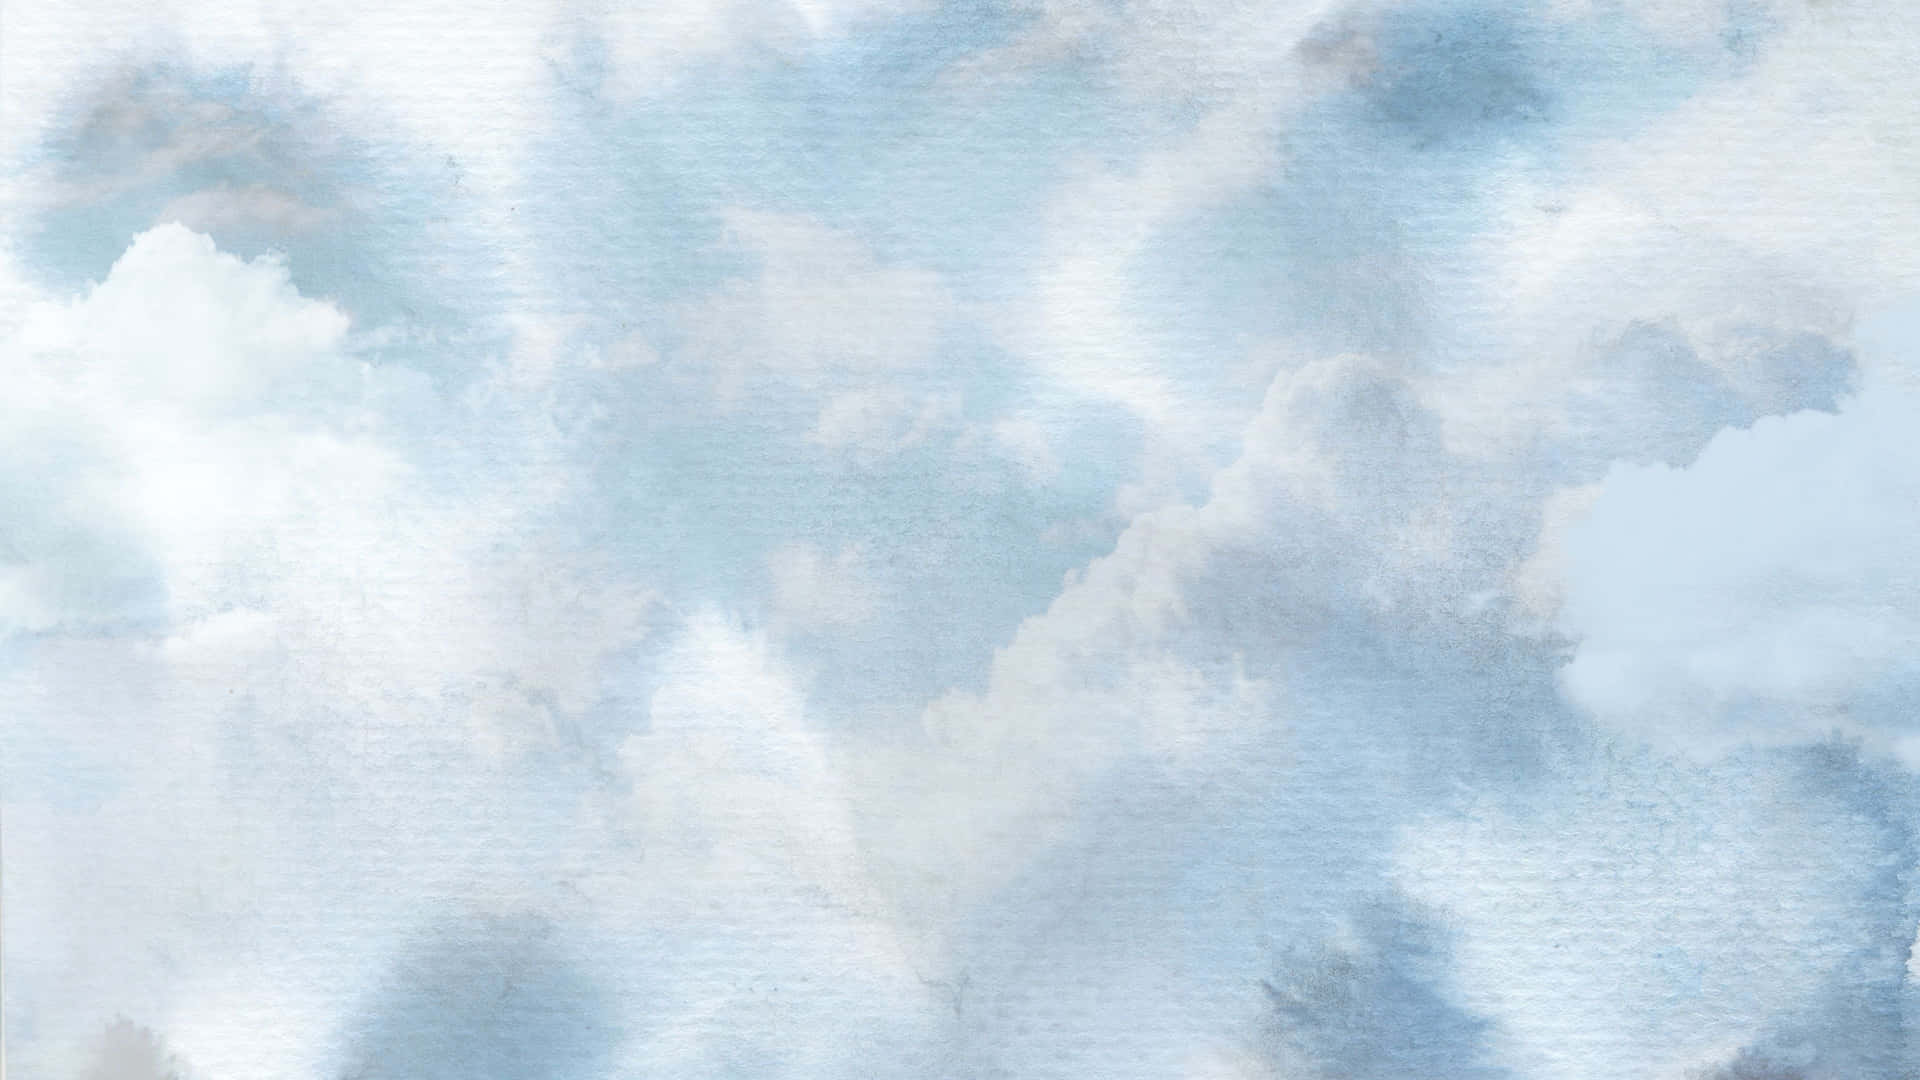 Aesthetic Clouds: A Heavenly View